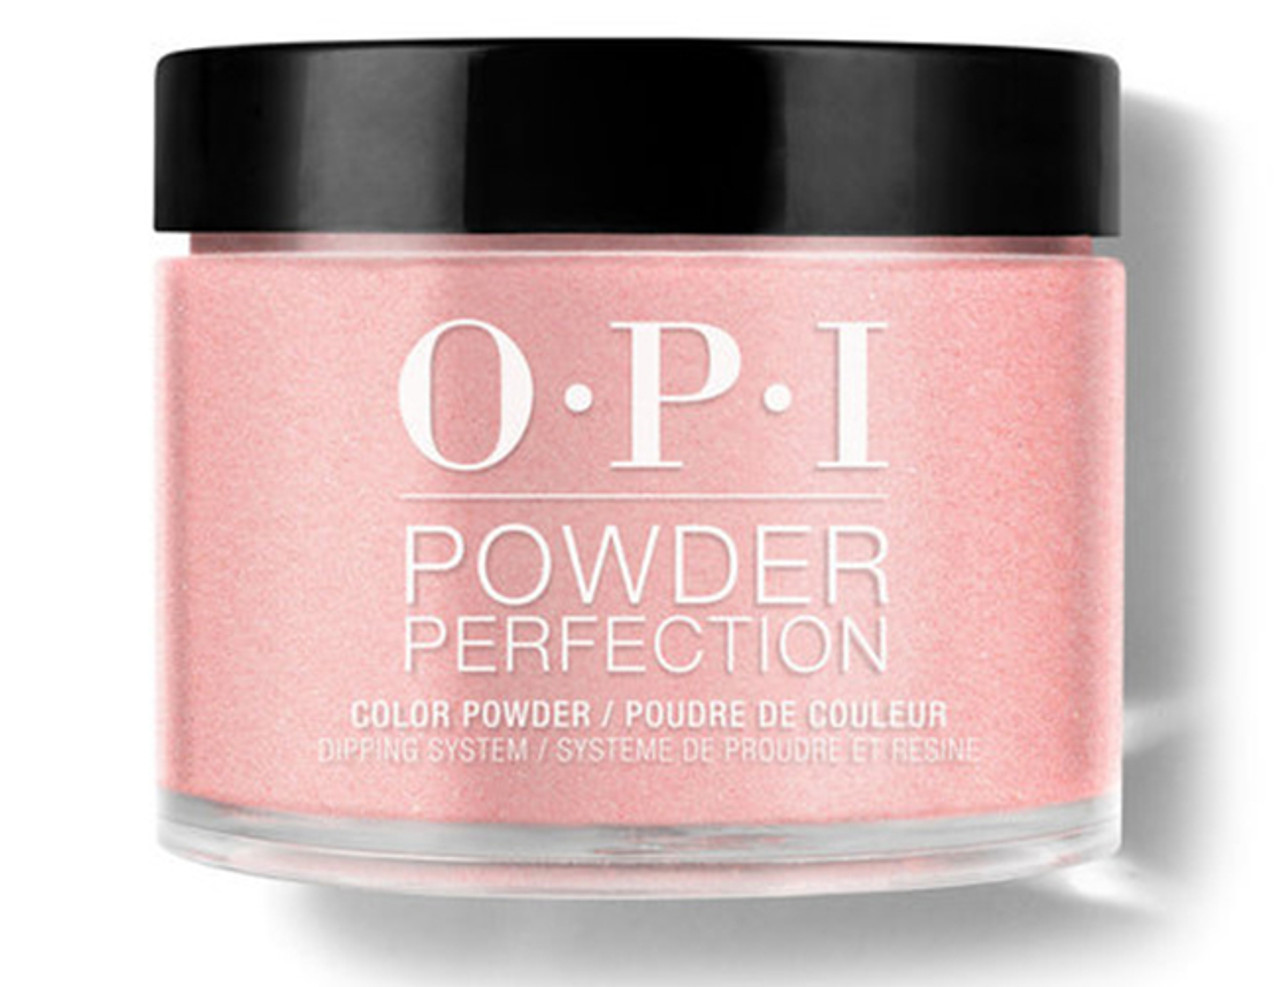 OPI Dipping Powder Perfection Cozu-Melted In The Sun - 1.5 oz / 43 G